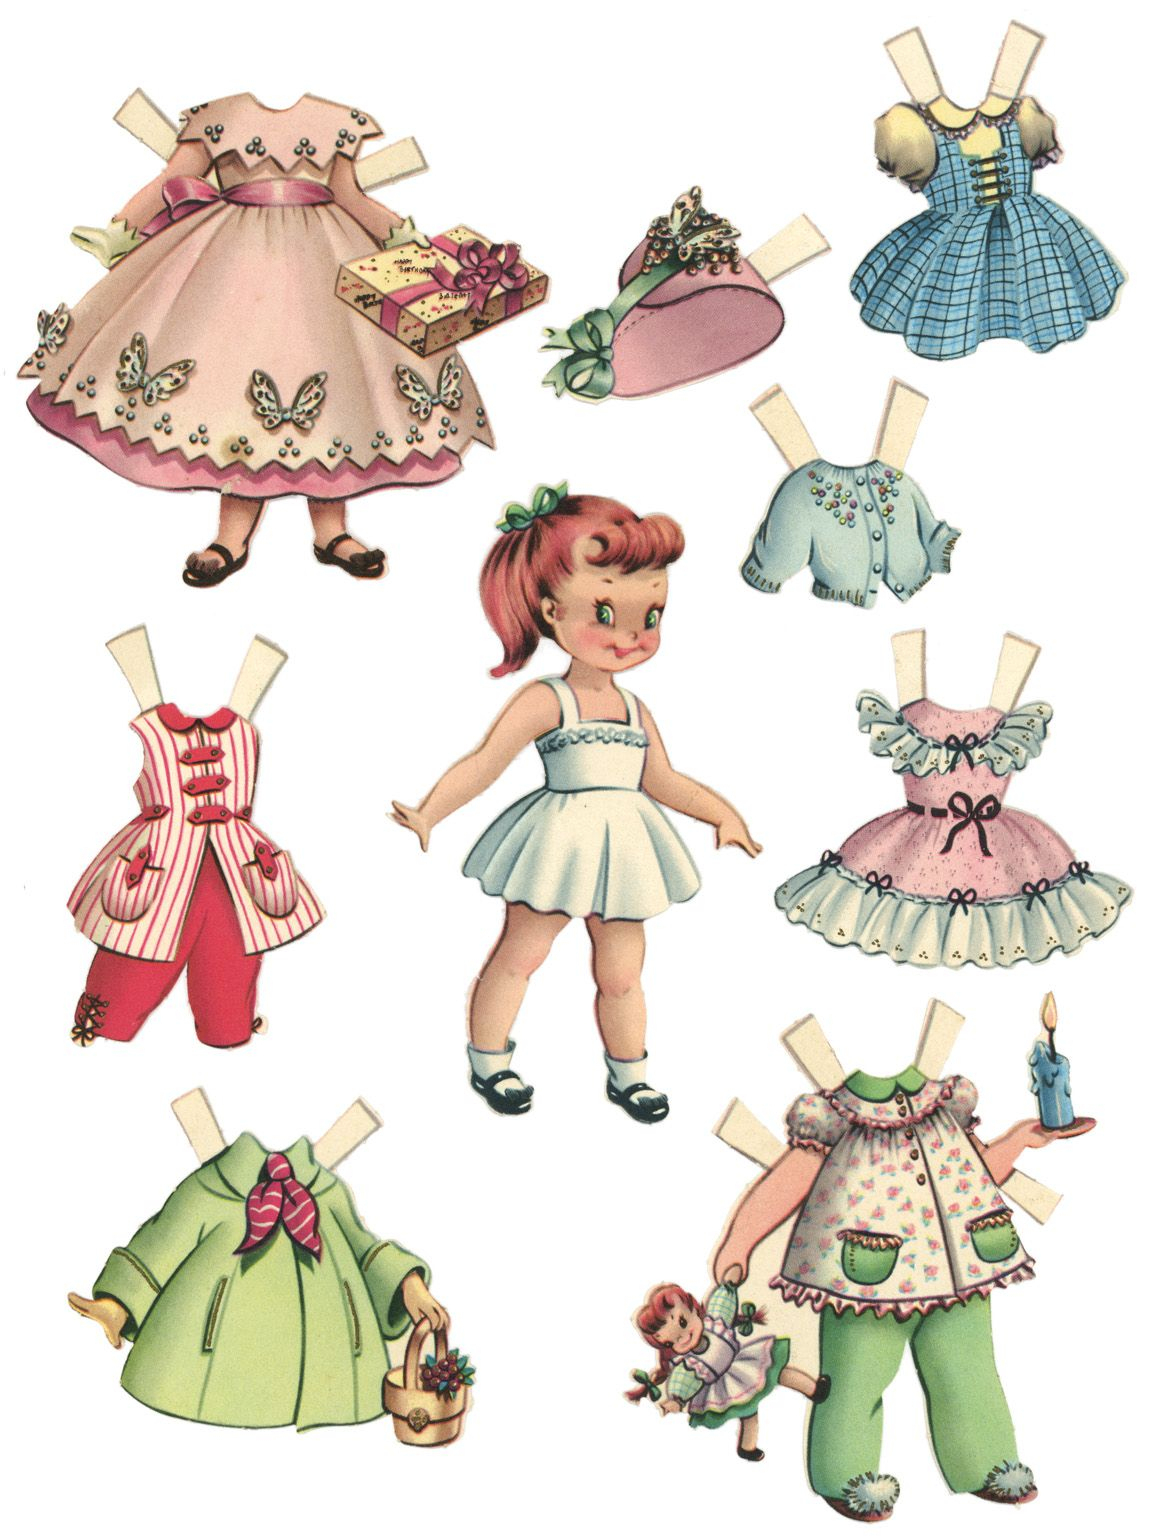 10 Free Printable Paper Dolls | Everyone Needs A Toy :) | Pinterest - Free Printable Paper Dolls From Around The World